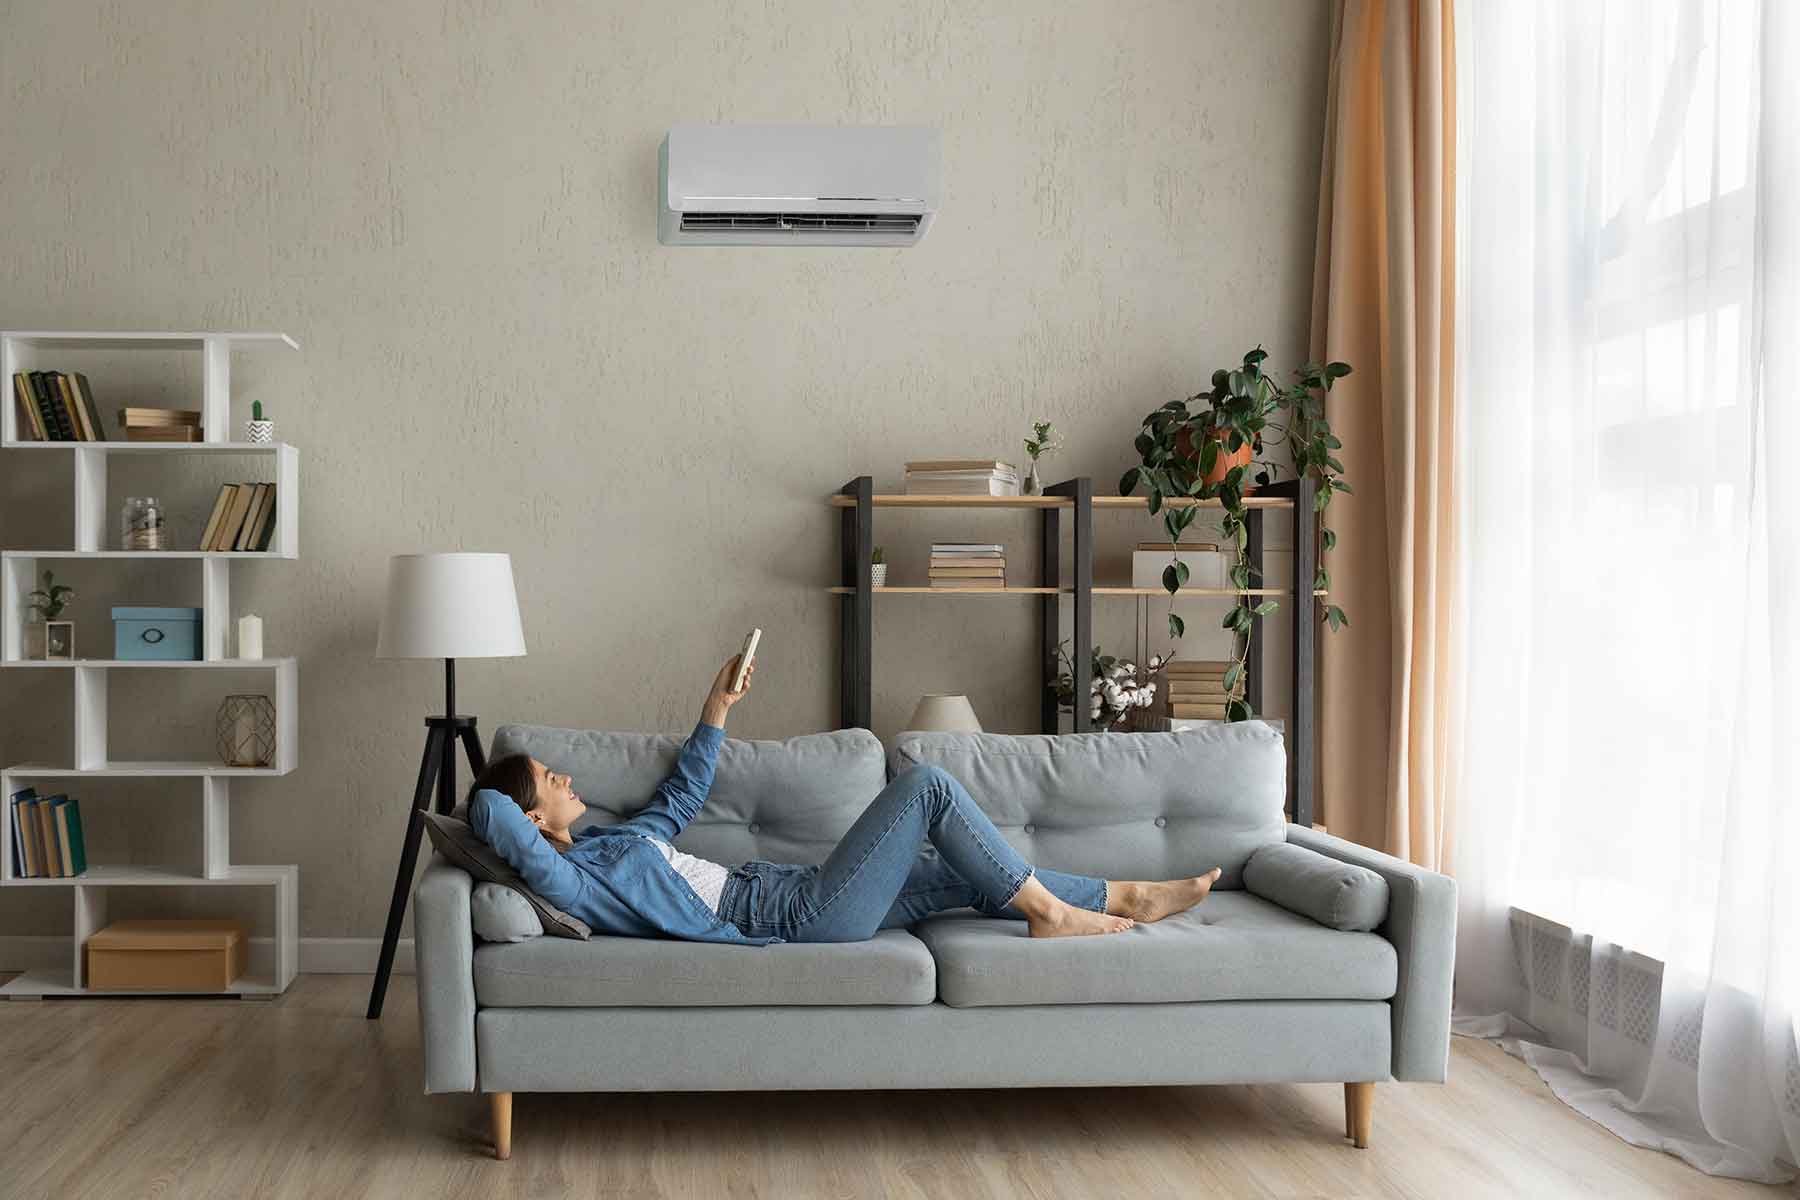 Exploring the Dangers: Ventless Heaters and Carbon Monoxide Poisoning